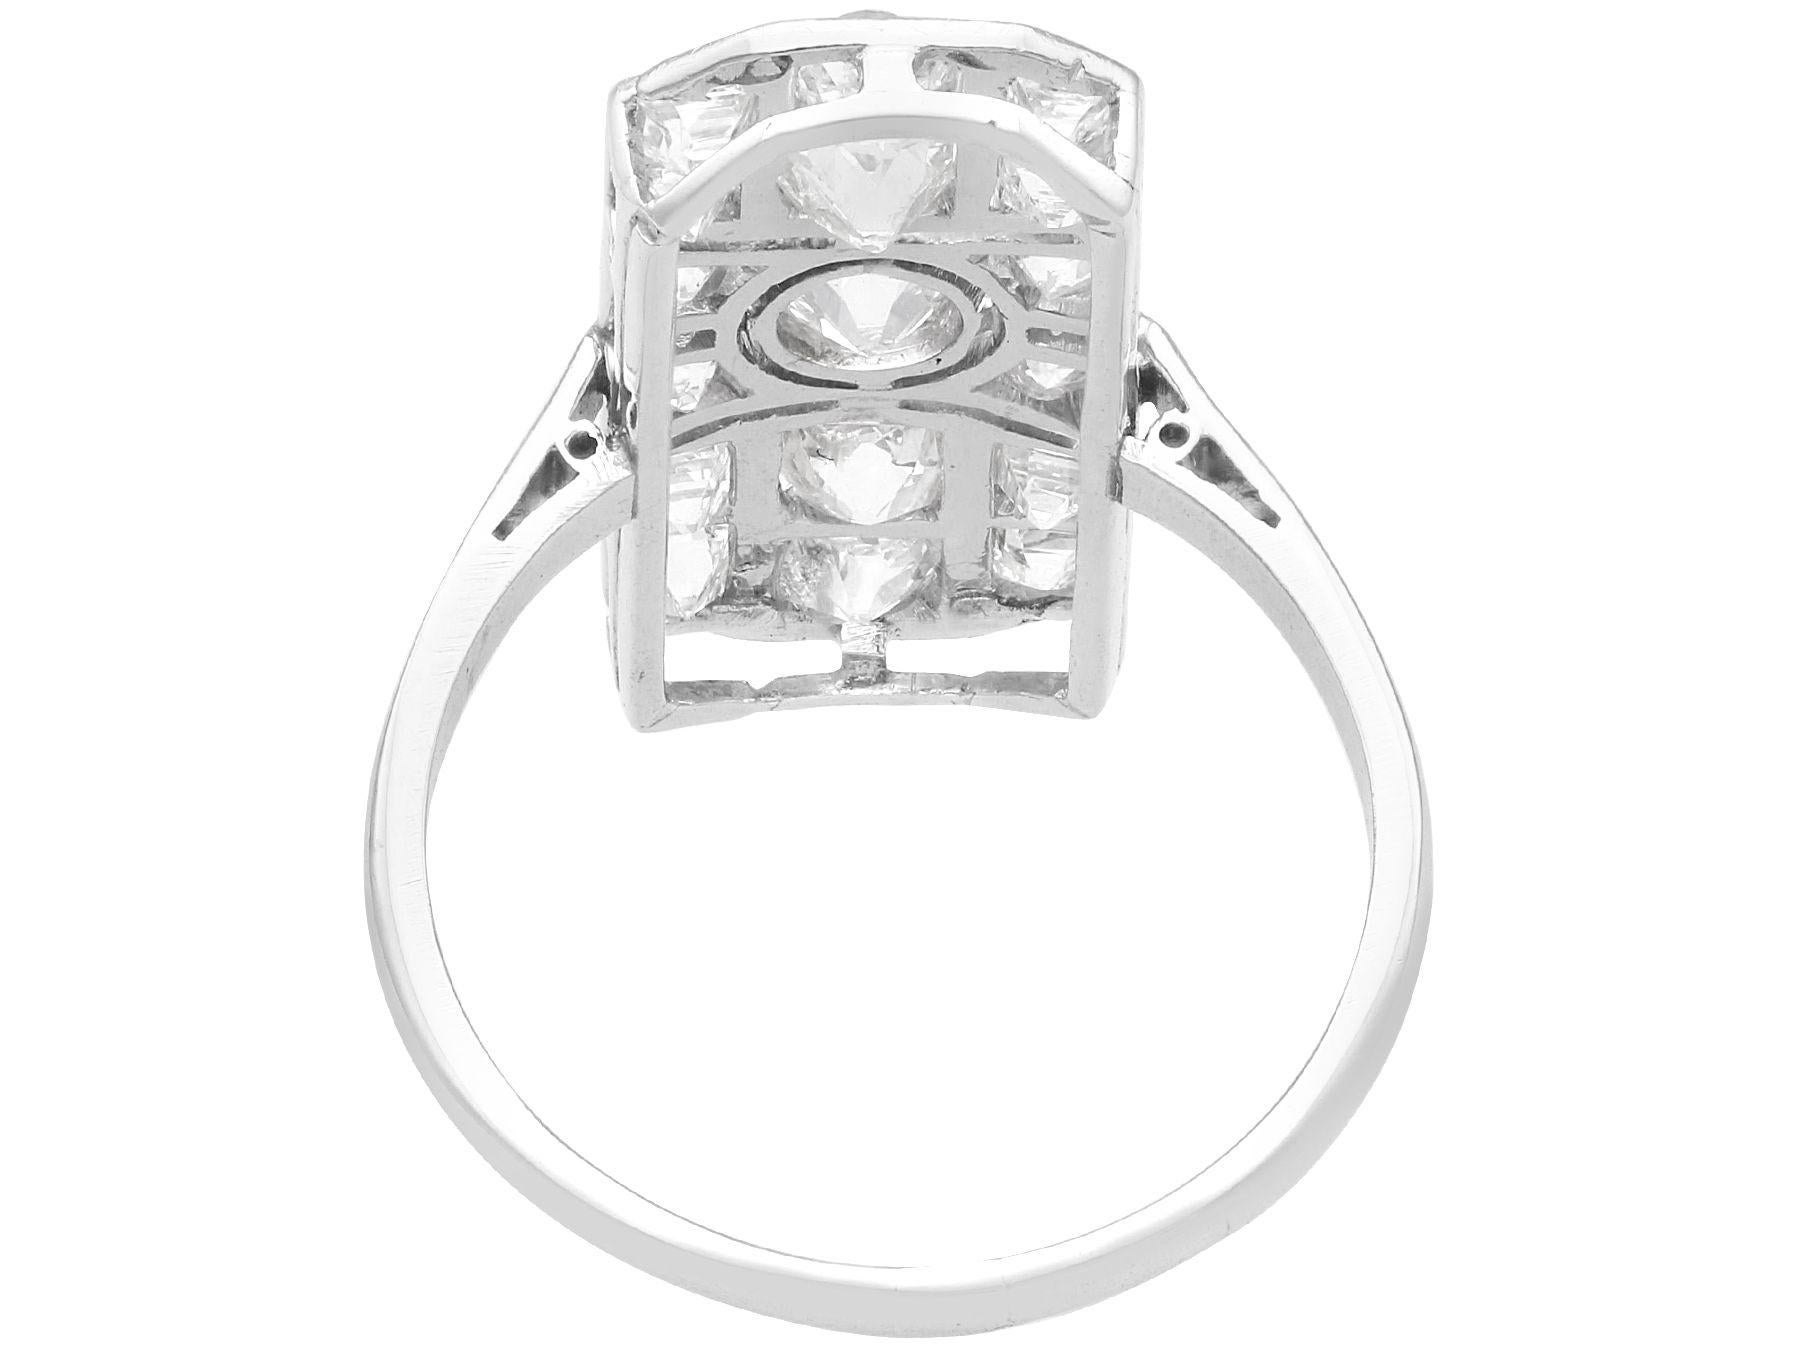 Antique Art Deco 2.48ct Diamond and Platinum Dress Ring In Excellent Condition For Sale In Jesmond, Newcastle Upon Tyne